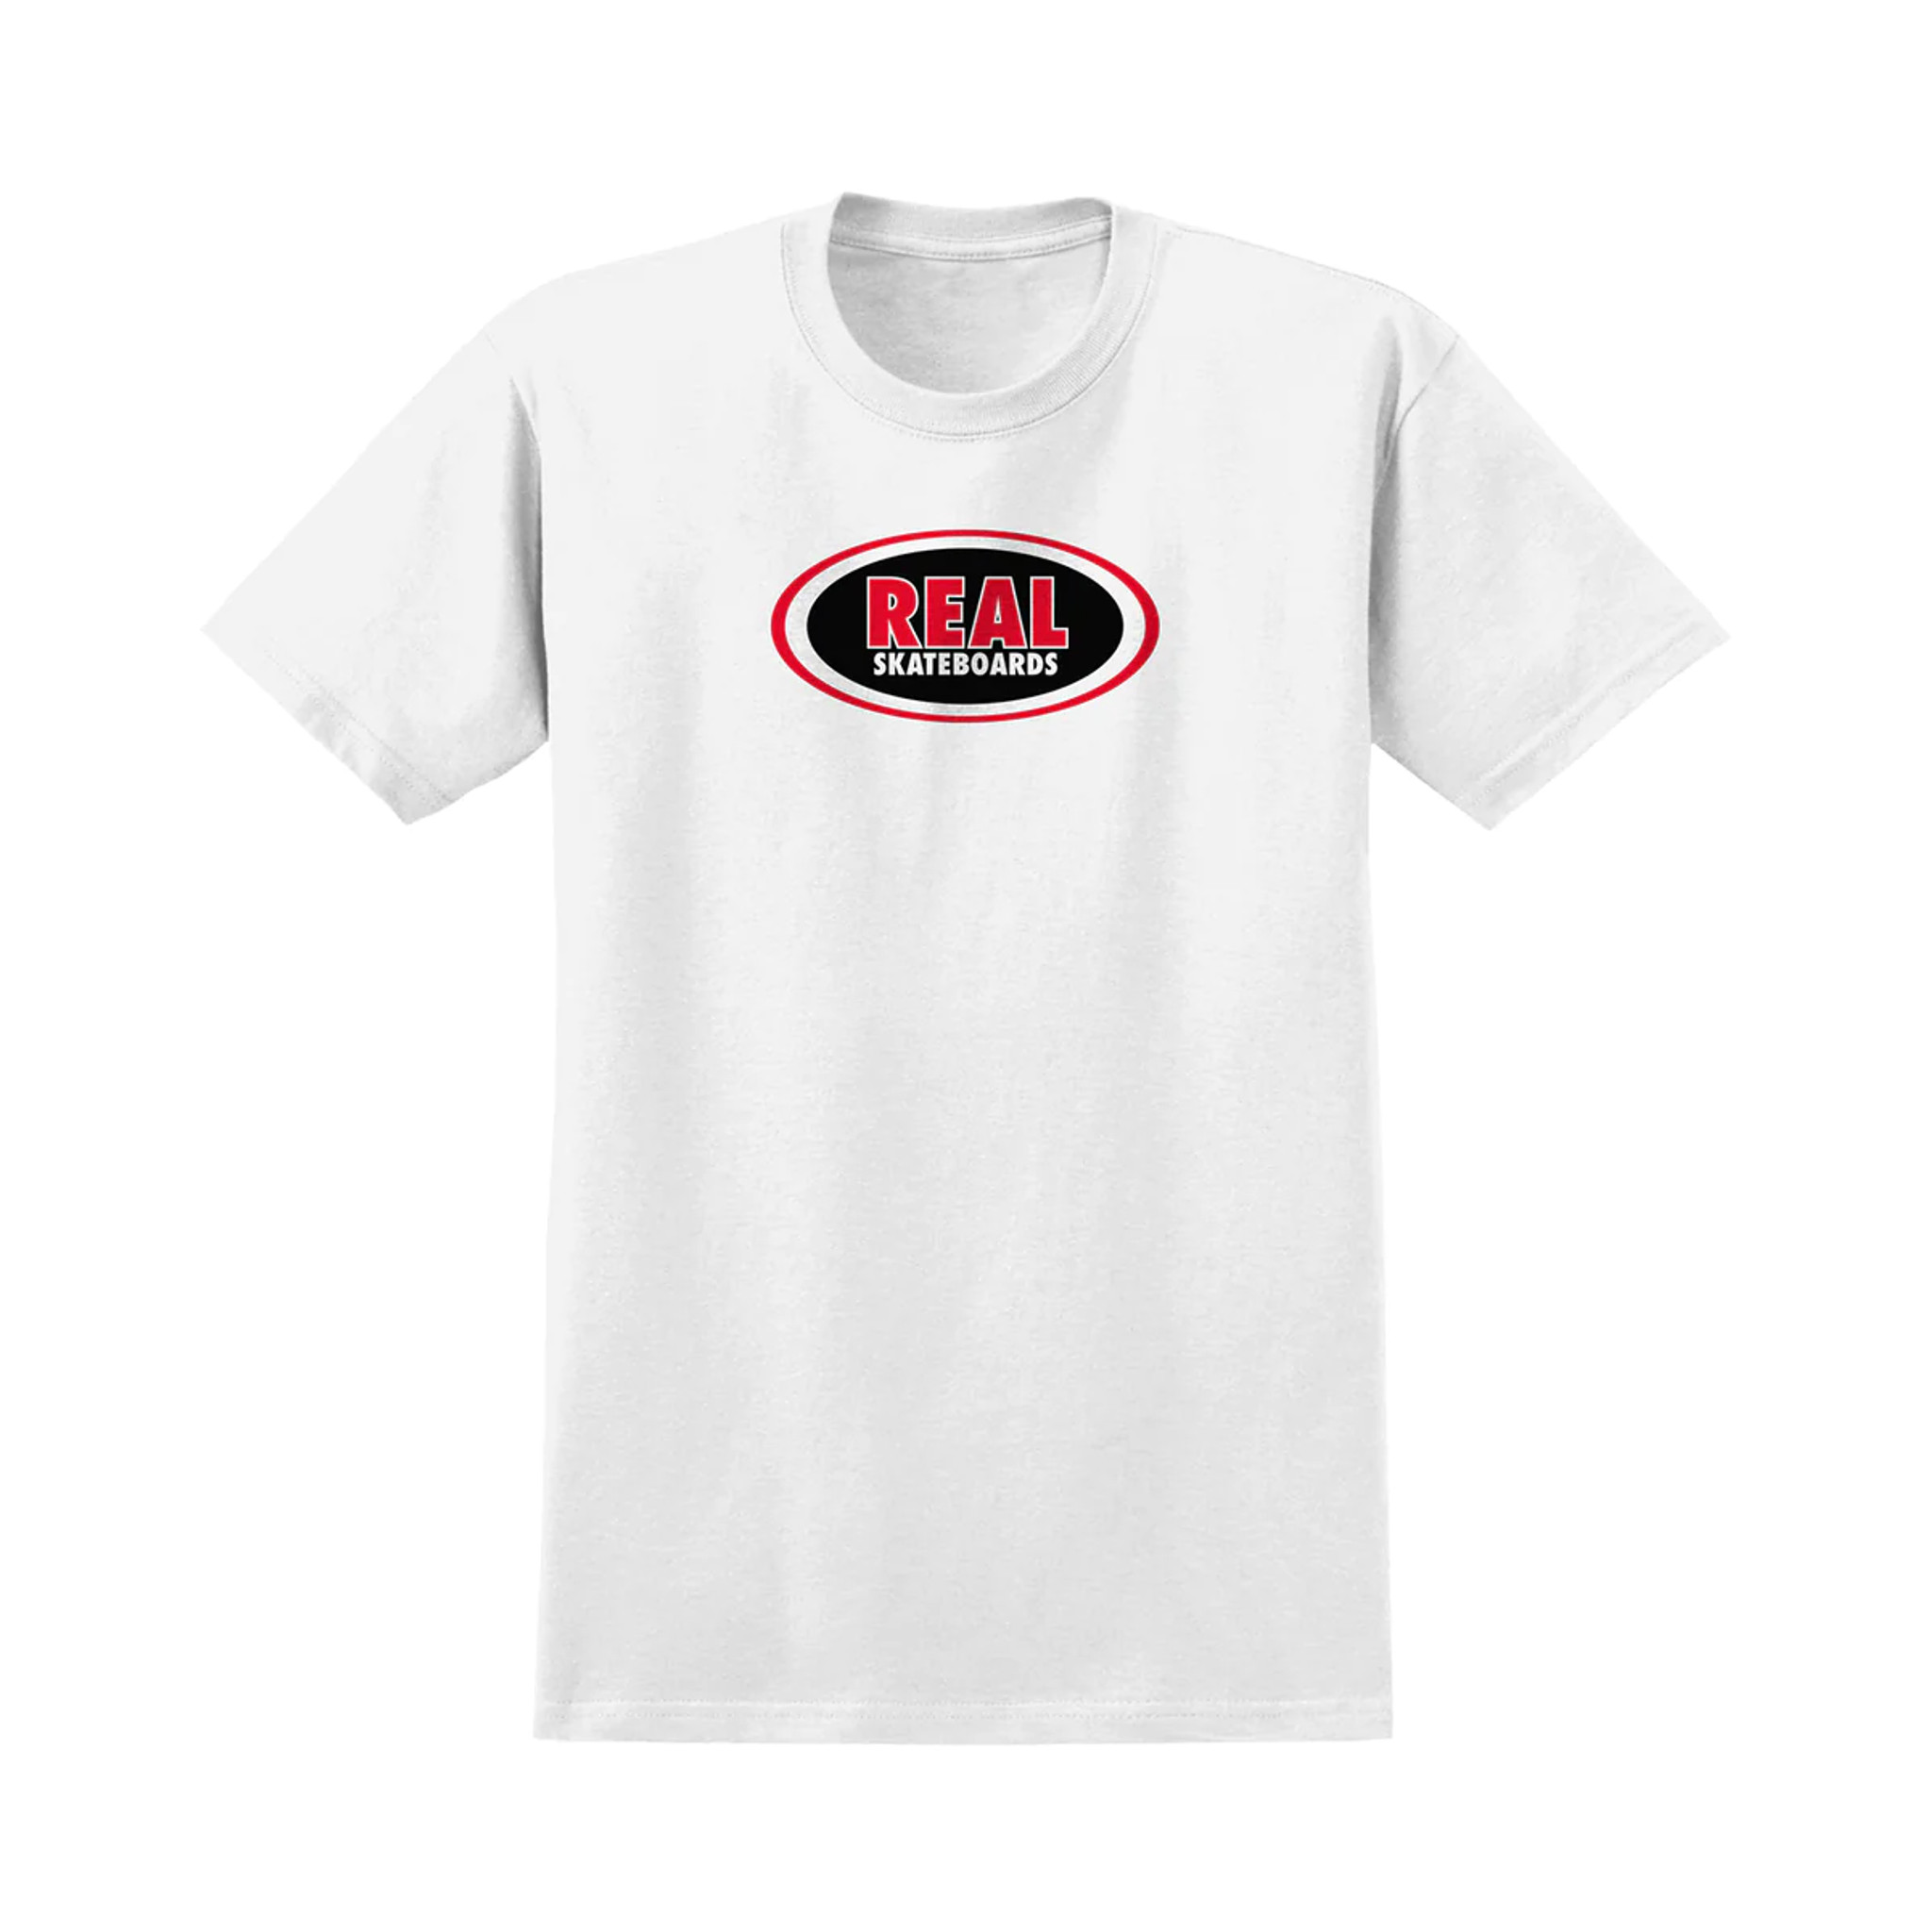 Real Skateboards Oval T-Shirt (White)